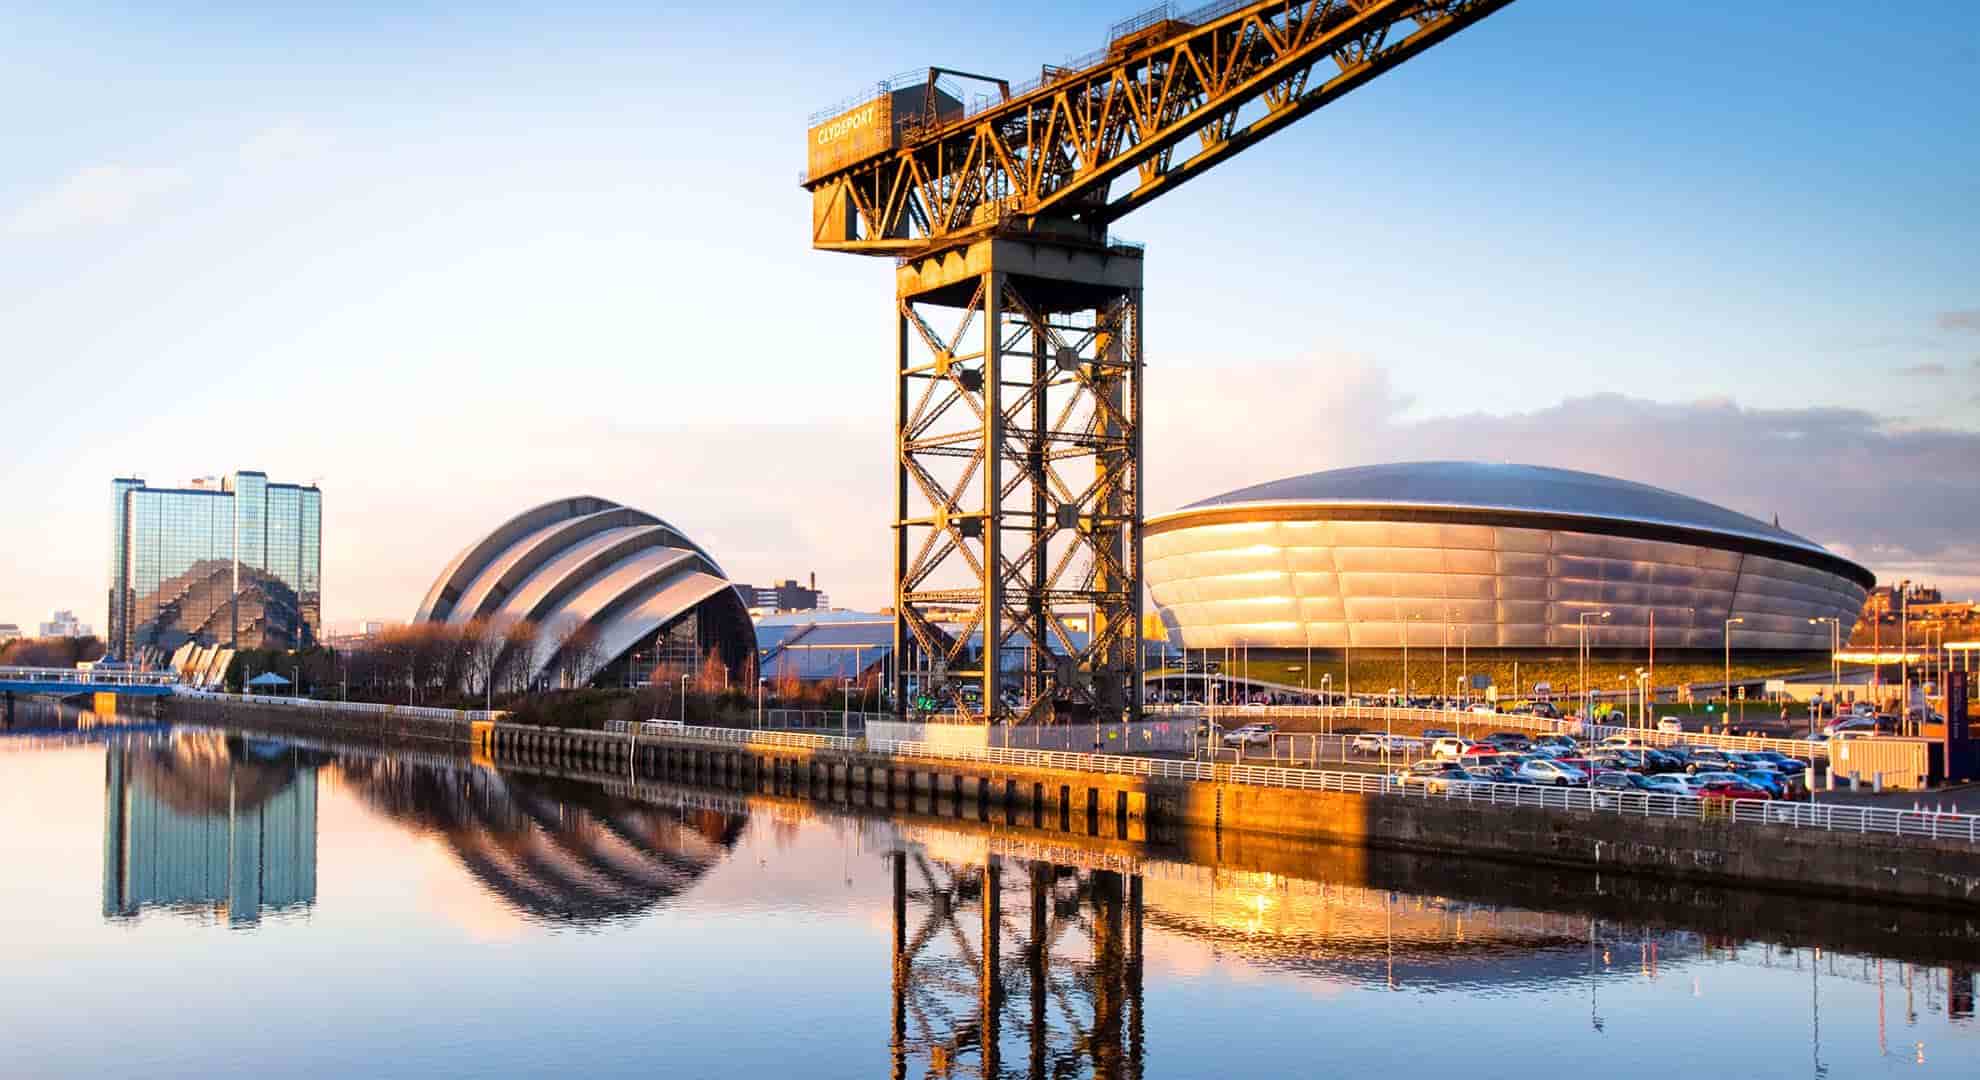 Photo of Finnieston Crane, the Hydro and the SEC Armadillo - the backdrop to COP26 in Glasgow Photo of Finnieston Crane, the Hydro and the SEC Armadillo - the backdrop to COP26 in Glasgow